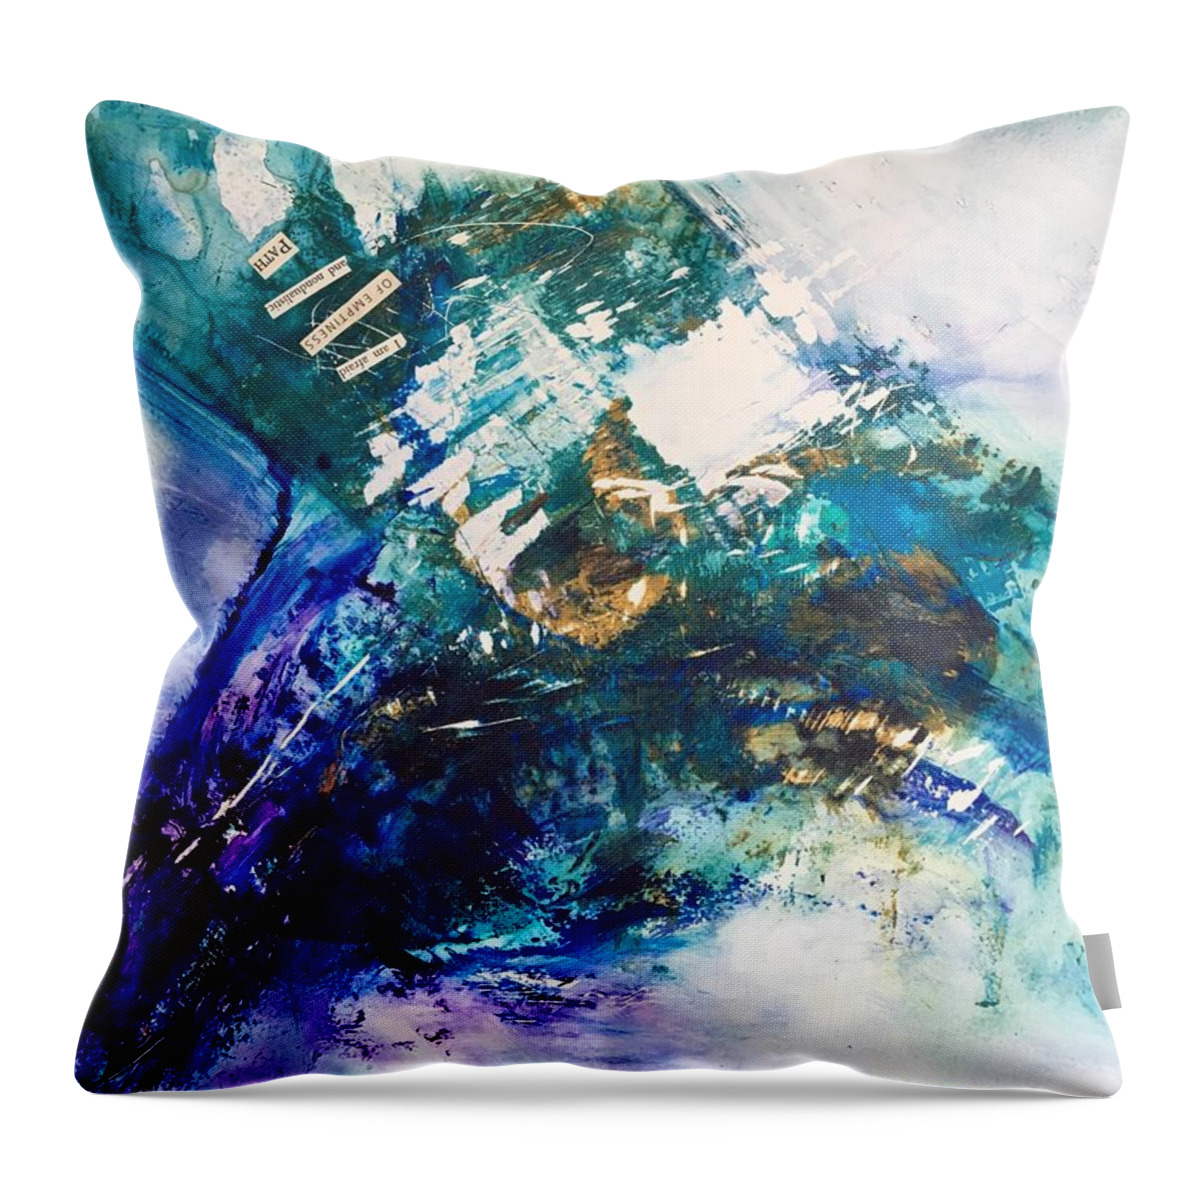 Abstract Art Throw Pillow featuring the painting Illustrious Prism by Rodney Frederickson